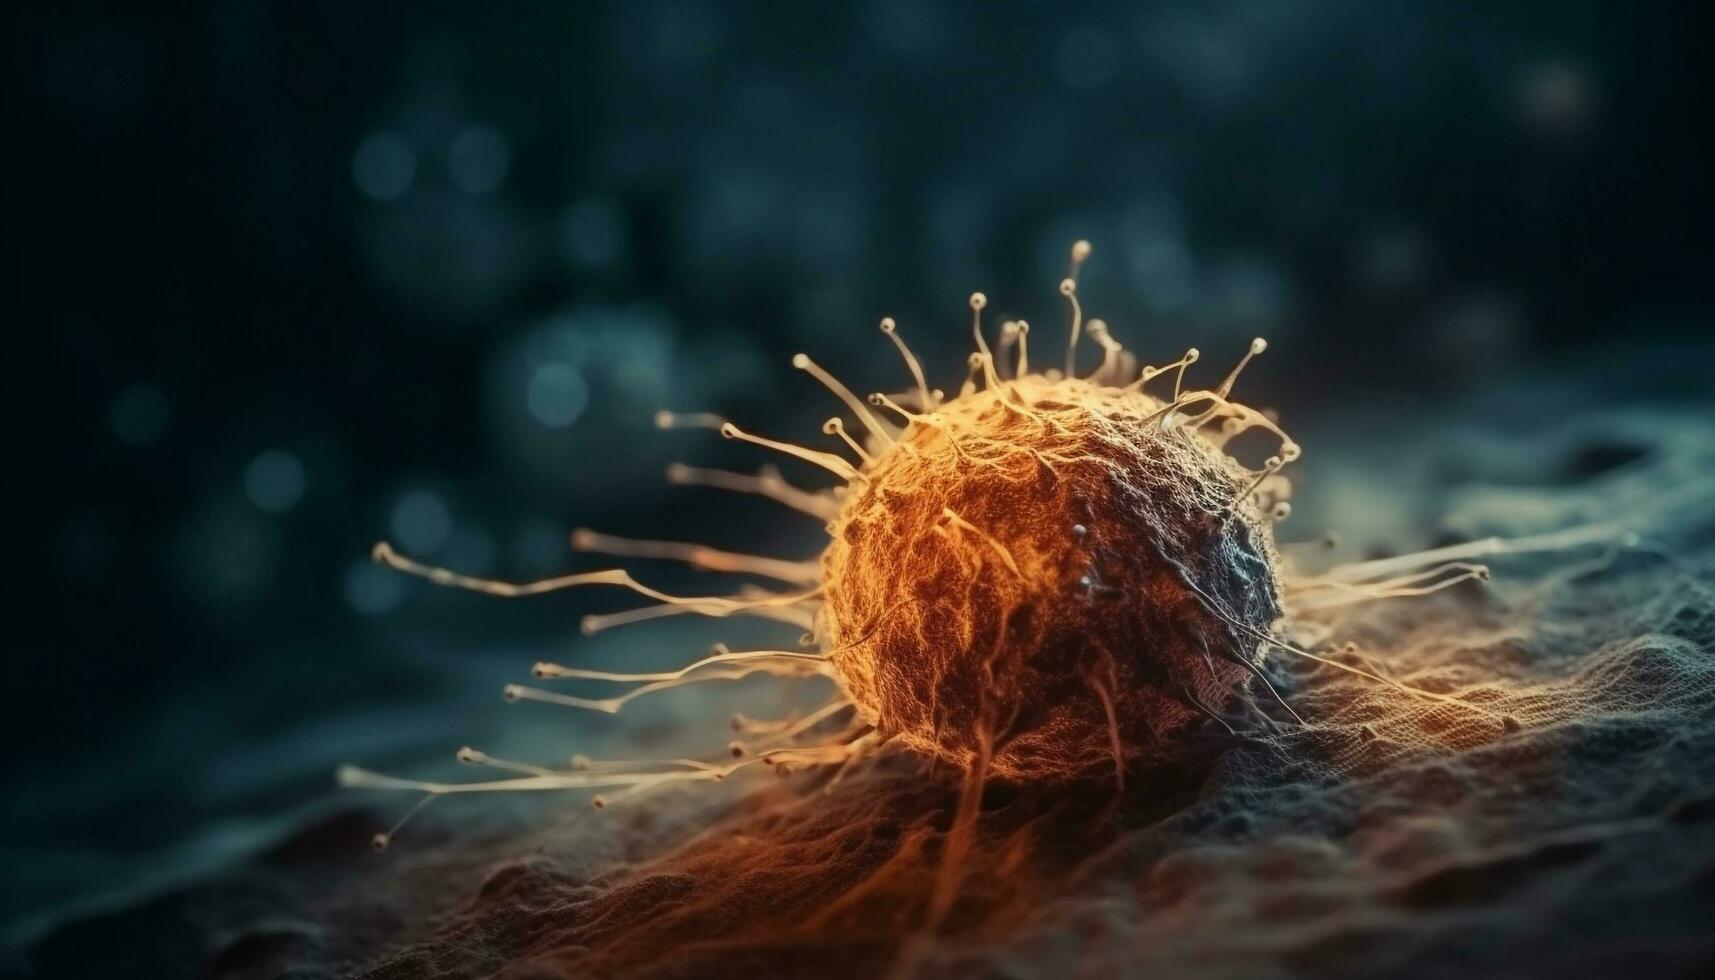 Magnified cancer cell reveals deadly molecular structure generated by AI photo